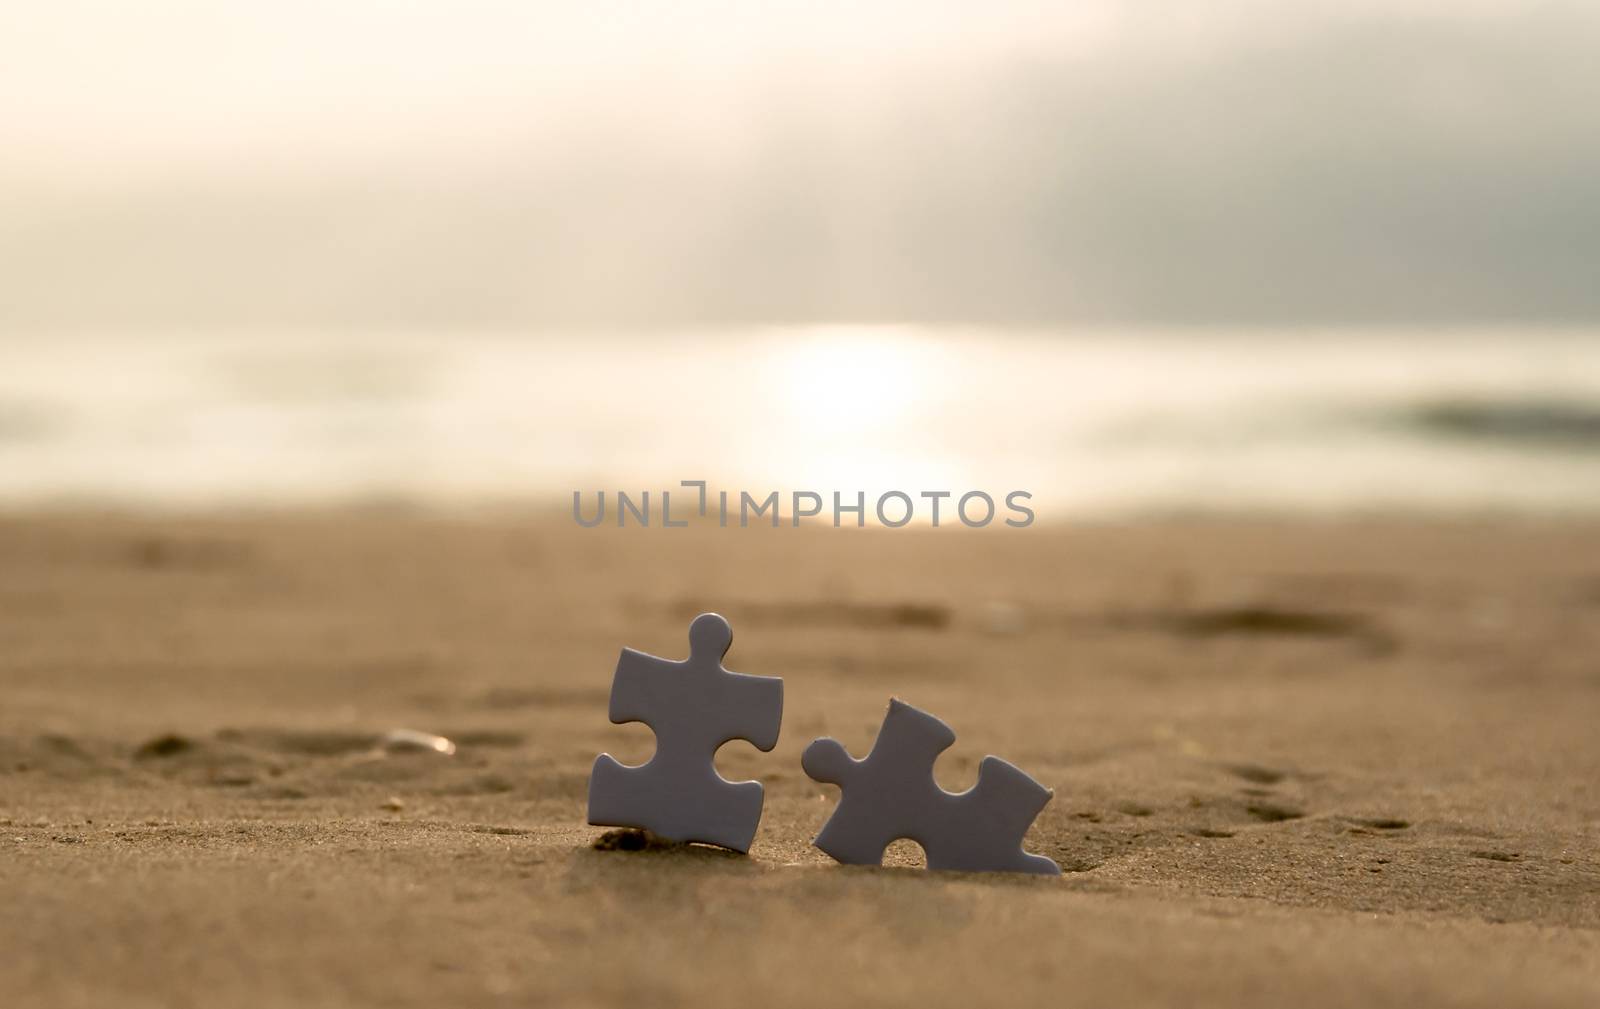 Jigsaw on the beach sand matching puzzle pieces together